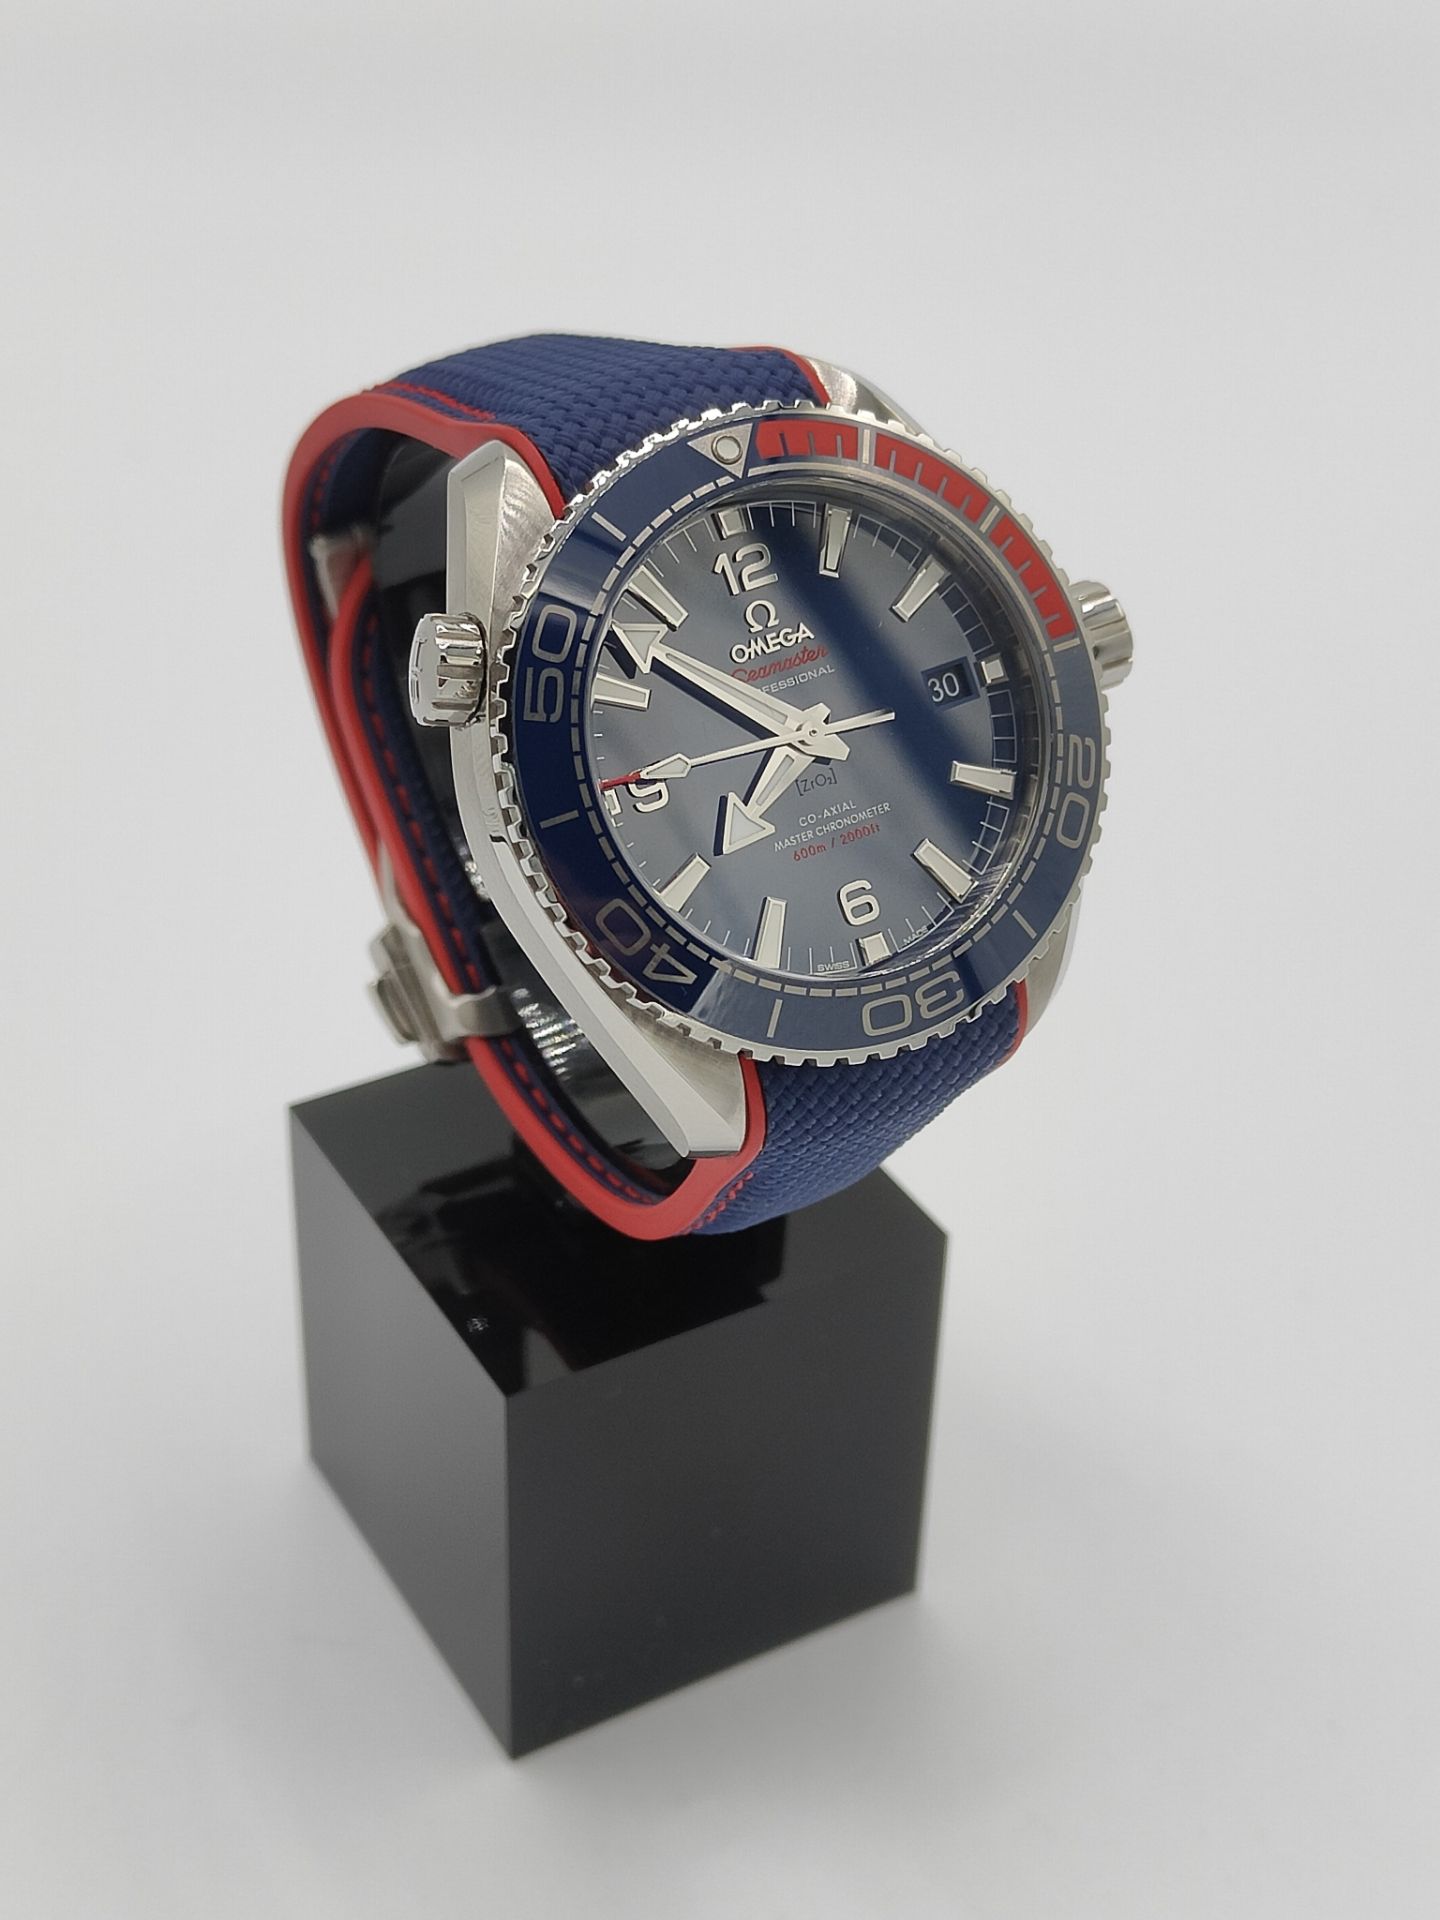 Omega Seamaster Planet Ocean Pyeongchang 2018 Limited Edition Watch - Image 2 of 11